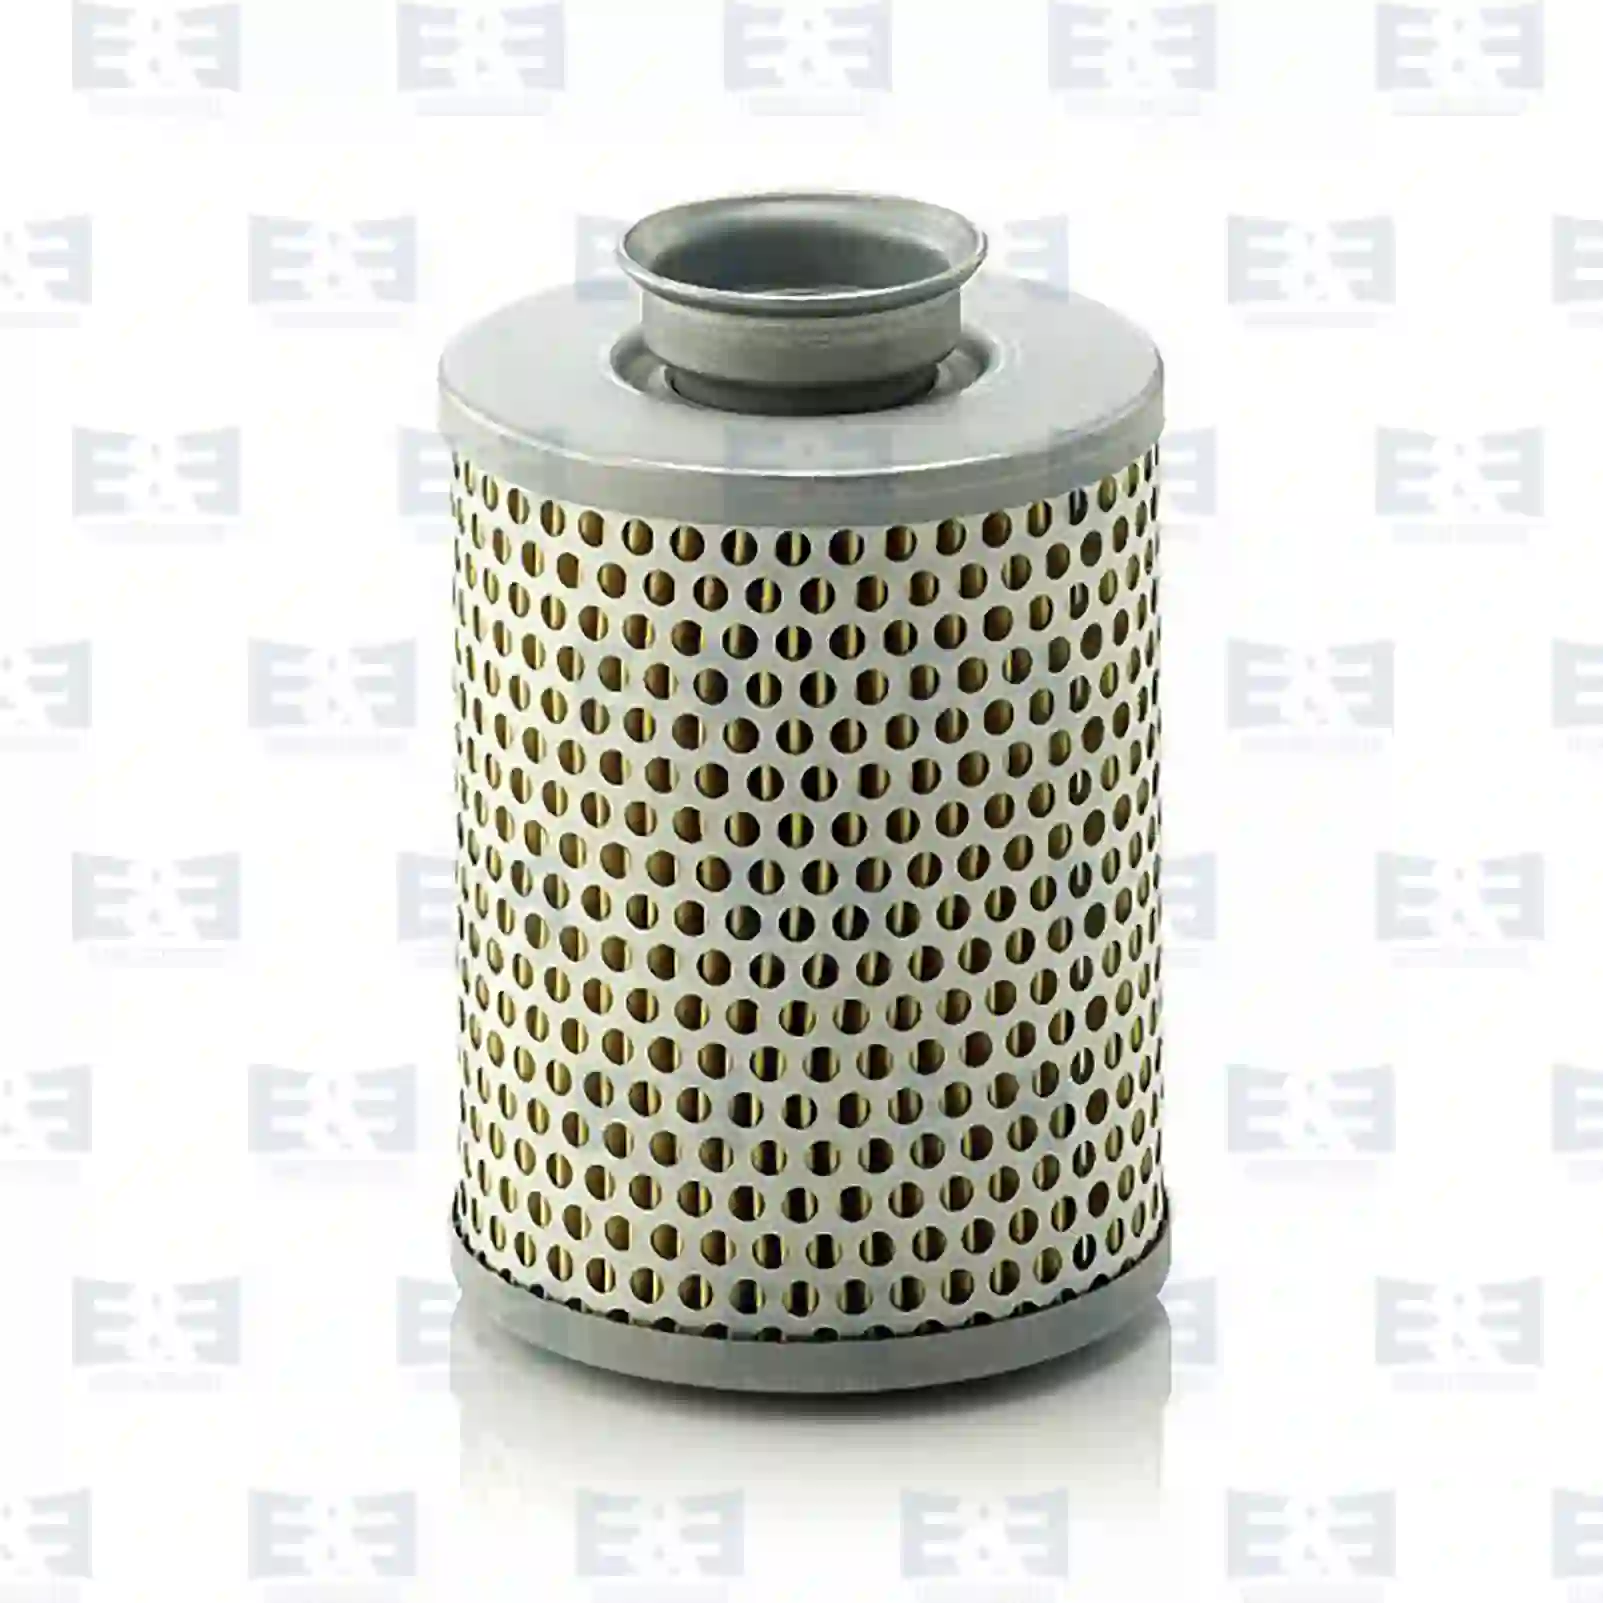 Oil Container, Steering Oil filter insert, EE No 2E2206135 ,  oem no:00507826, 00565955, 00641276, 00641285, 00782301, 00782318, 00908251, 4398149, 4502498, 4502499, 45024994, 74502499, 74734248, B2499, B4844, ZE67267000, 33710530209, 0713069901, 0713069902, 711224U, 7633141101, 807200756, 011541, 018152AB, 08152AB, 08926AB, 10017, A27302, VT3427, 9Y-4499, 1121689, 1121694, 1123151, 1123152, 1403695, 1405639, 1685241, 1711791, 1711971, 1723382, 1733882, 1821552, 200136, 302496, 3113311, 3990068, 645635, 645638, 646535, 647519, 6473475, 649421, 654638, 731125, 808042, 852758, 861032, 8990041, 8990044, 8990068, 907630, 909335, 911208, HA302494, HA302496, J0302496, J0647345, J0909335, J3990068, J8990041, J8990068, SP302496, 0001334980, 0302043, 1500662, 302043, 474910, 47491000, 01267900, 01909104, 1111601953100, 605412920001, 7633141101, 87511382178, 37843, 1111601953100, 7633141101, 1190514, 1B1365, F284950030020, 01267900, 09912650, 72053001, 79912650, Y02549901, YO2549901, 5001748, 5001753, 5014391, 1420351, 5572499, 5572693, 5573444, 5574259, 5574470, 7984452, 1595109, 1595131, 1595509, 25012824, 5570003, 5570015, 5570148, 5570224, 5572509, 5572748, 5573444, 5574470, 5576049, 5970295, 7984861, 0001848525, 2941292M1, 773906234, 921488, 019467, 0228051, 00883834, 00912650, 01267900, 02992056, 09912650, 75174, 01267900, 87511382178, 0003634631, 1267900, L976, 7594031901, 09912650, 72053001, 07633141101, 51055040007, 81055040007, 81055040051, 81055046001, 81473010002, 81473070001, 82055046001, 90807200756, 1014219, 1014290, 1086925, 1121694, 1324428, 1502470, 1509106, 1600011, 1712580, 1750581, 1750588, 1752177, 184522, 1900371, 2914292M1, 2941291M1, 2941292M1, 3144305M1, 620121, 620125, 620300, 620304, 620310, 620314, 623941, 624548, 624549, 642547, 642548, 642549, 671018, 671163M91, 671763, 826147, 830910, 835817, 840293M91, 840751M91, 841241M91, 841244, 81055040007, 0000940004, 0001800209, 0001848525, 0004660004, 0004660006, 6274660004, 8225007022, 605412920001, 1220037, 1220210, 122323, 12237, 1490764, 15434A, 85010, 350571, F350571, G0350571, 546078271, 0003563604, 0403316240, 0500255463, 0500255643, 4033162440, 5000255463, 5000255643, 6005019556, 00002005216, 1327488, 134419, 168185, 205727S1, 7633141101, 8225007022, 295470705, 1685242, 197482, 341722, 395436ND, 395488, 519836, 520829, PA351405, 9921008600, 98067, 98072, 98092, 323139, 3231396, 3231596, 40151102, 6234582, 807200755, 0117980, 101687, 117980B, 203592, 32101, 509026, 5272, 960294, A117980B, UP203592, 5818, 645636, 0010724303, ZG03045-0008 E&E Truck Spare Parts | Truck Spare Parts, Auotomotive Spare Parts